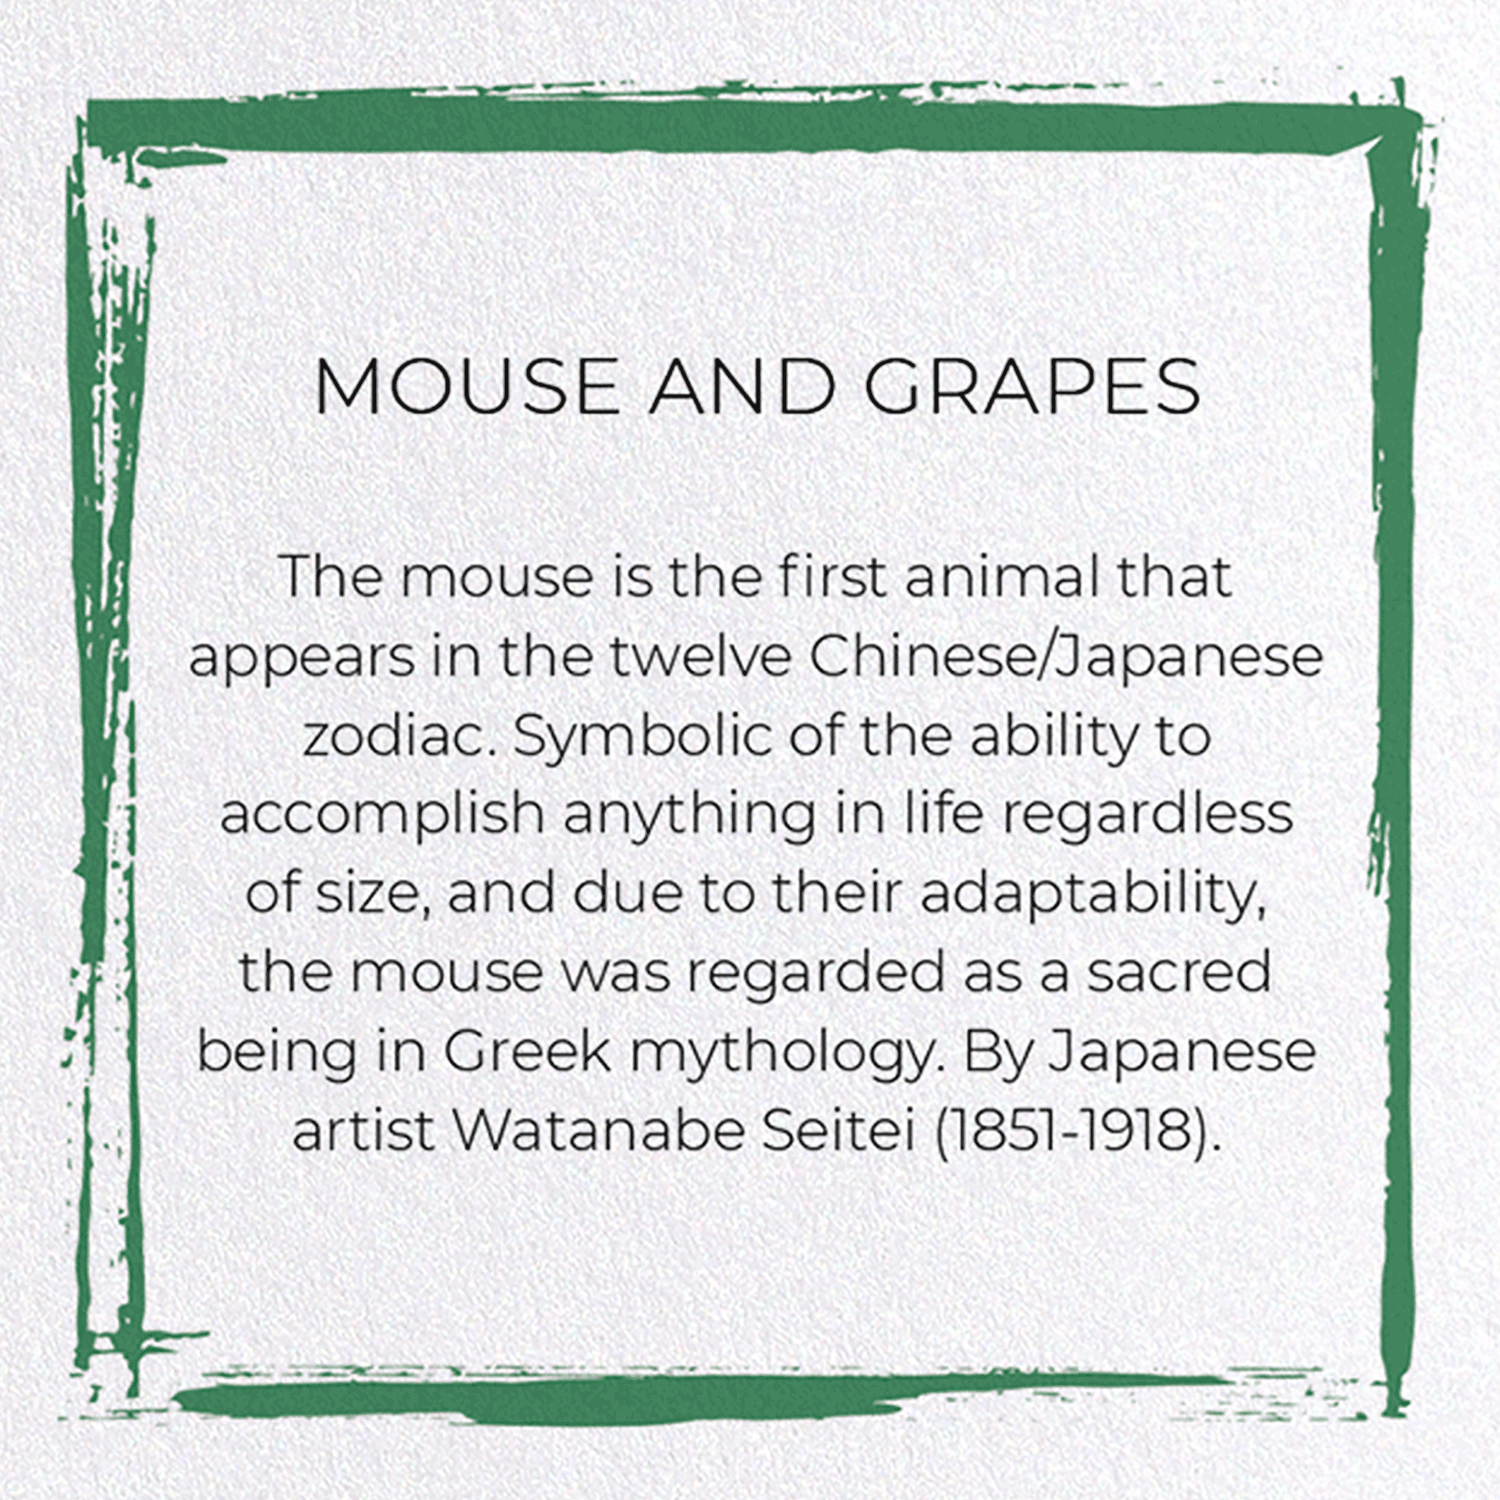 MOUSE AND GRAPES